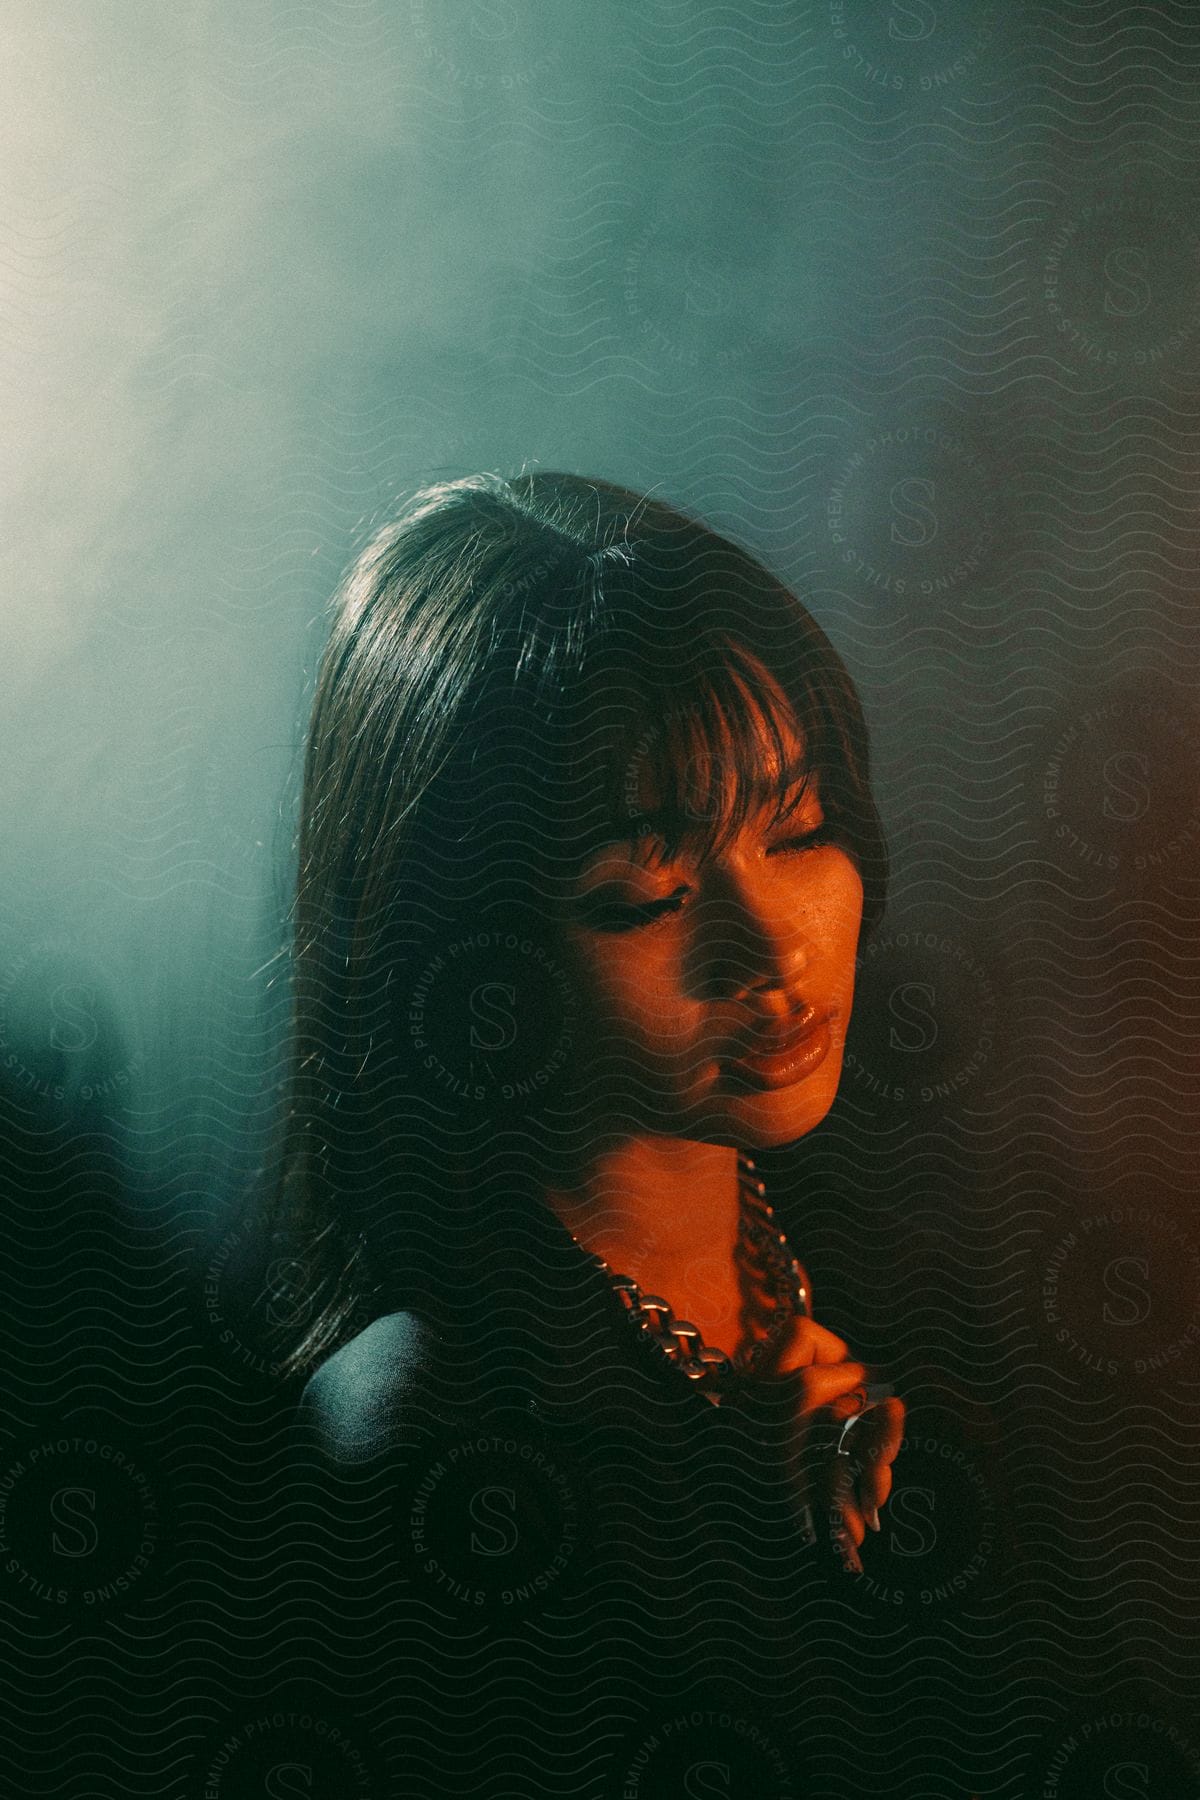 A woman poses with her eyes closed clutching her necklace against a smoky background in a studio shoot